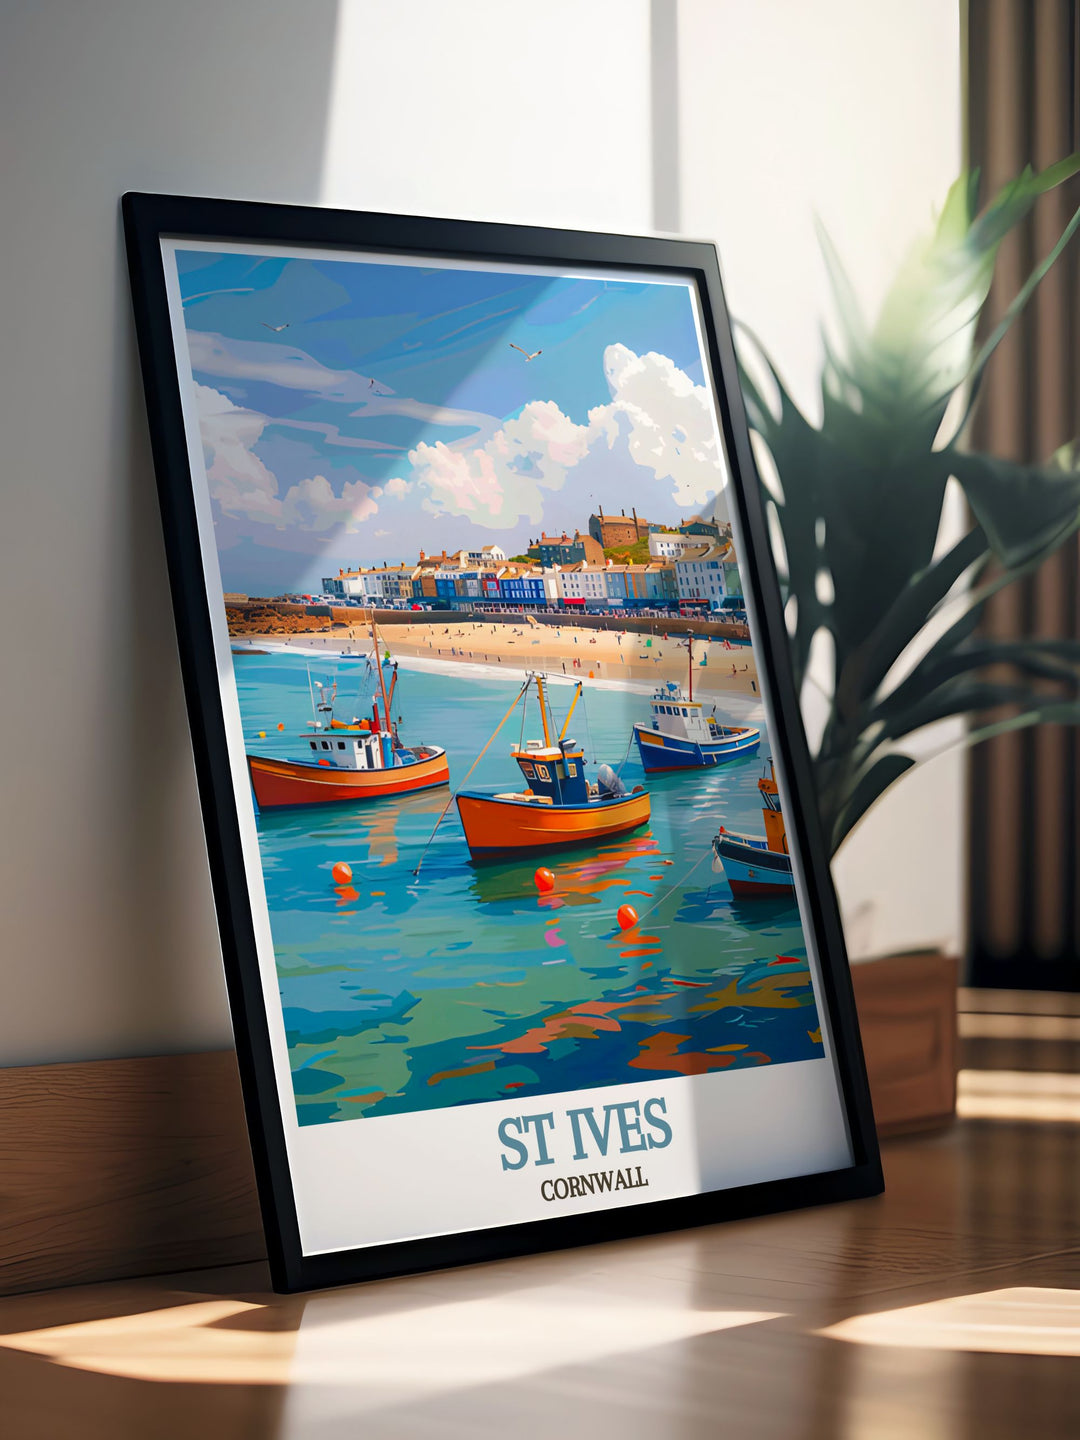 This travel poster captures the lively atmosphere of St Ives Harbour, inviting viewers to experience the daily life and scenic beauty that make this Cornish town a beloved destination.